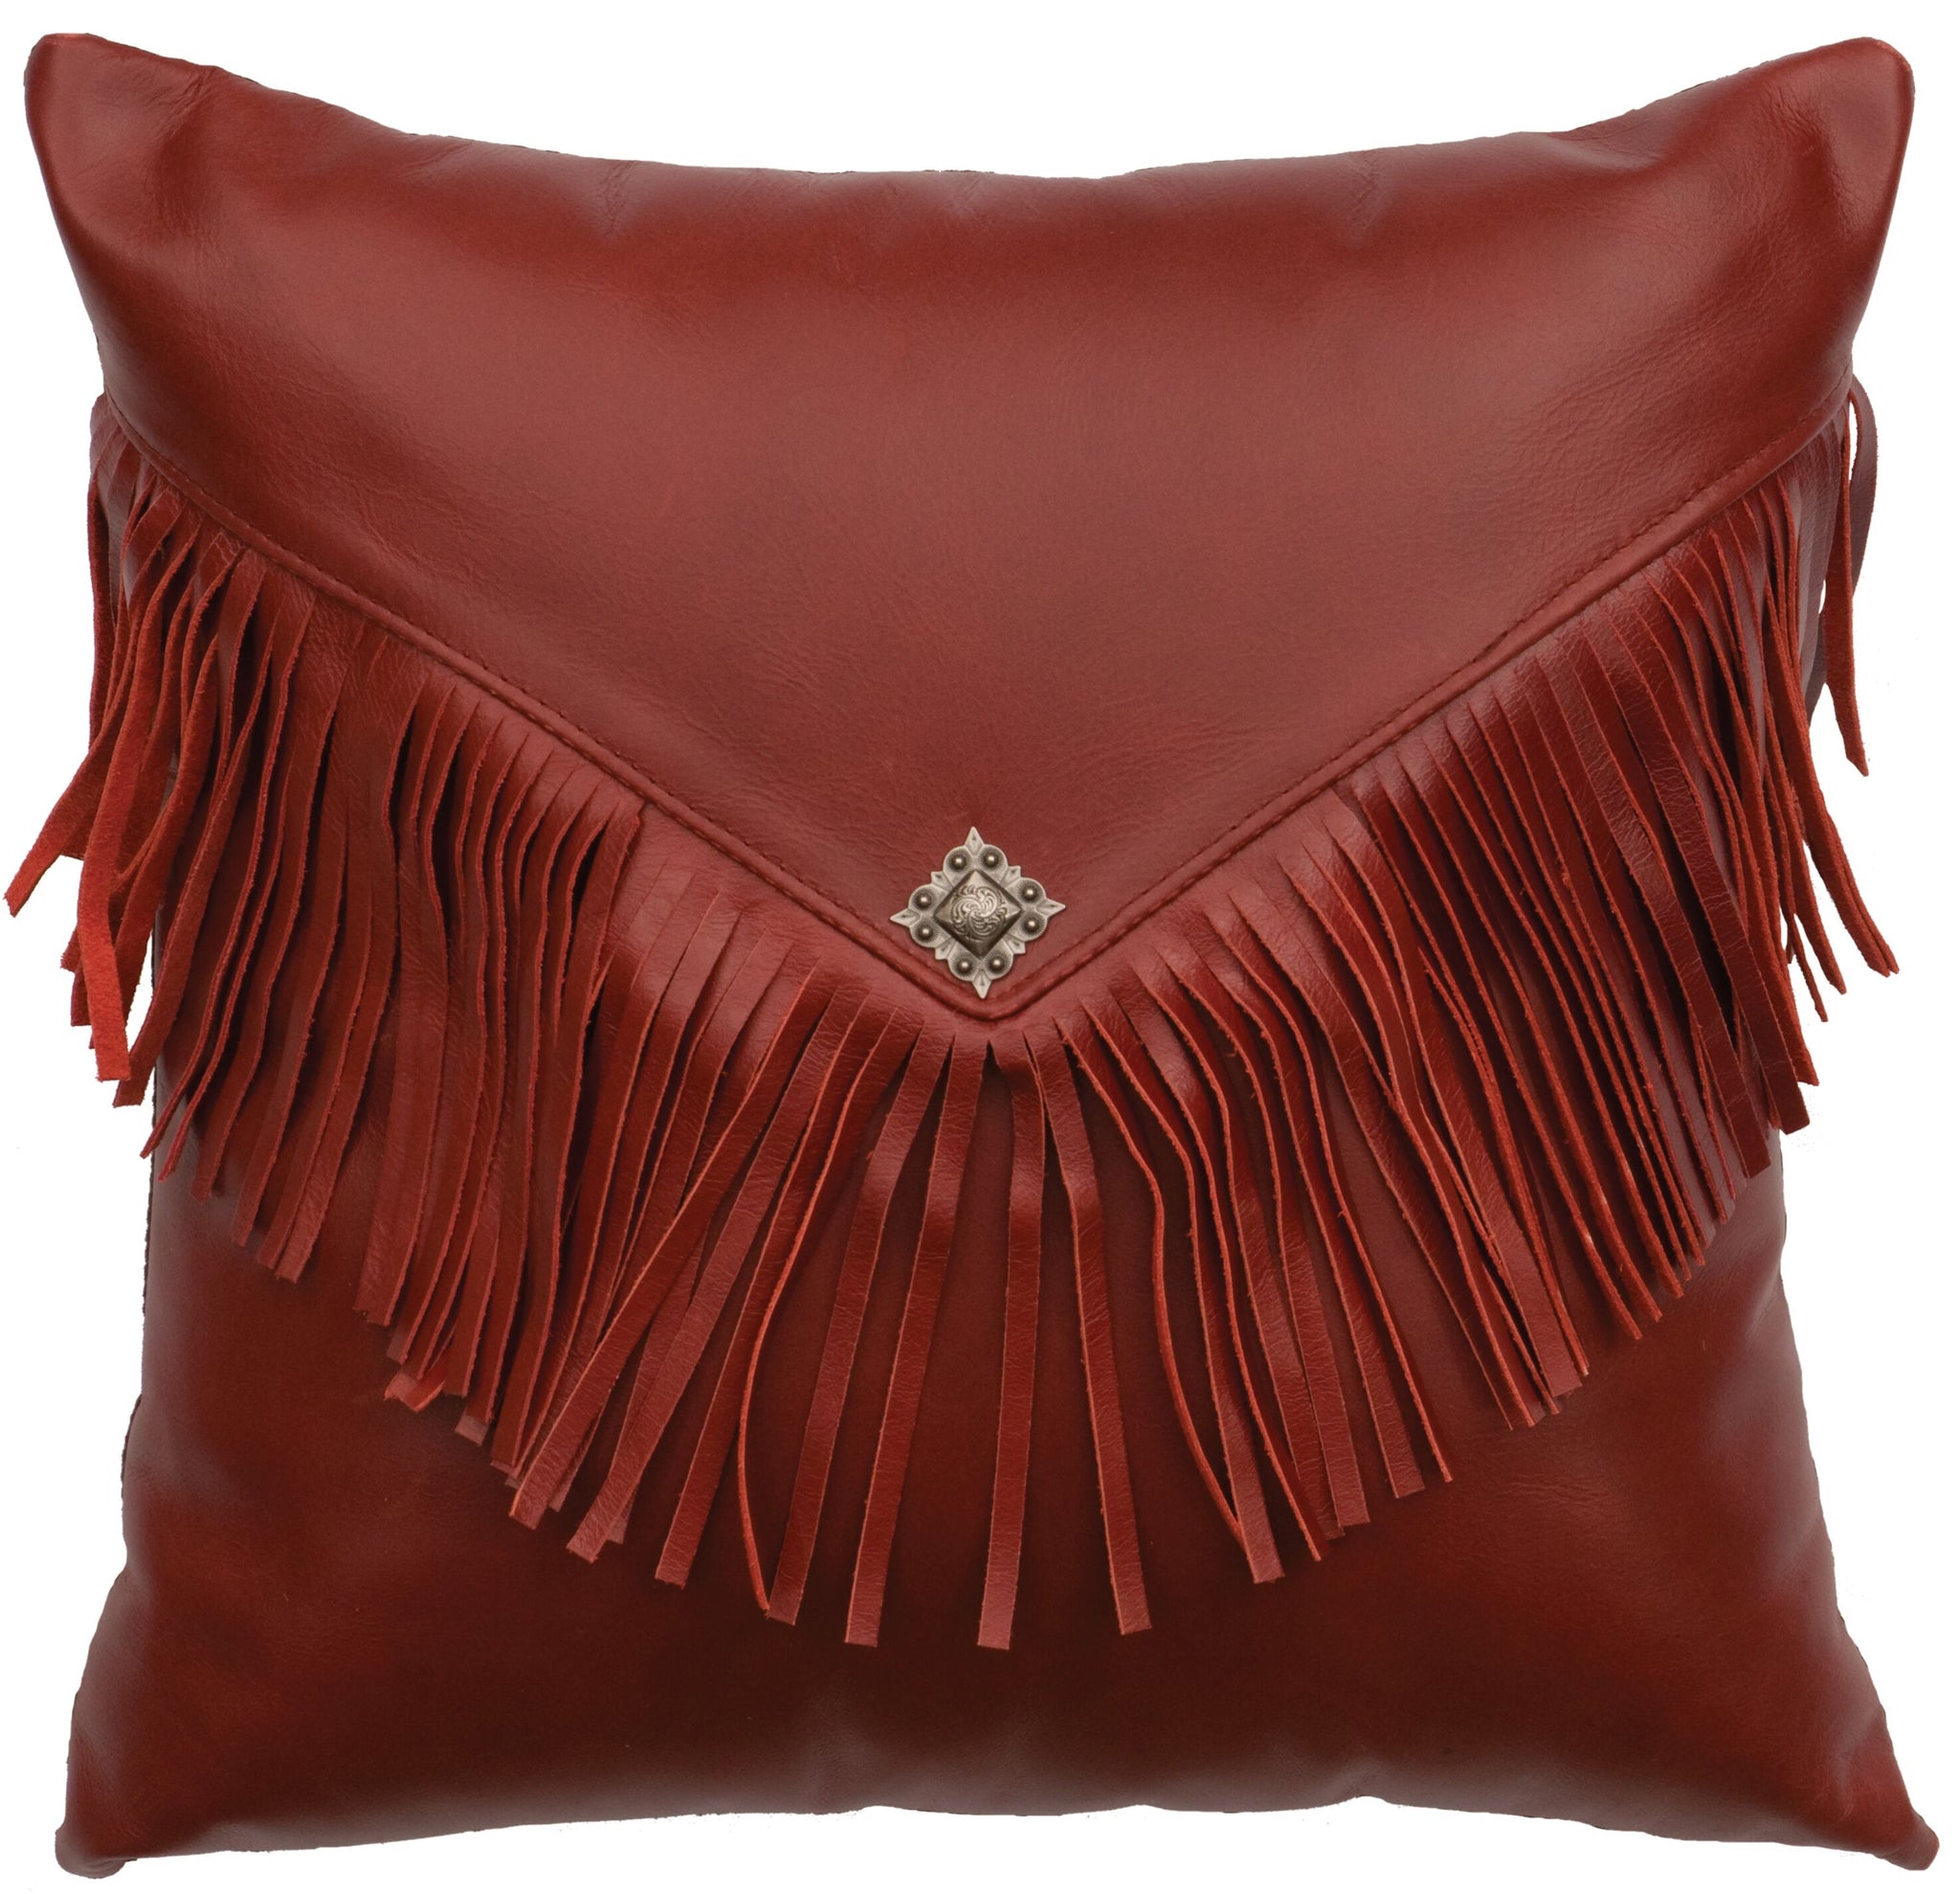 Leather Pillows Wooded River WD80205 - Unique Linens Online